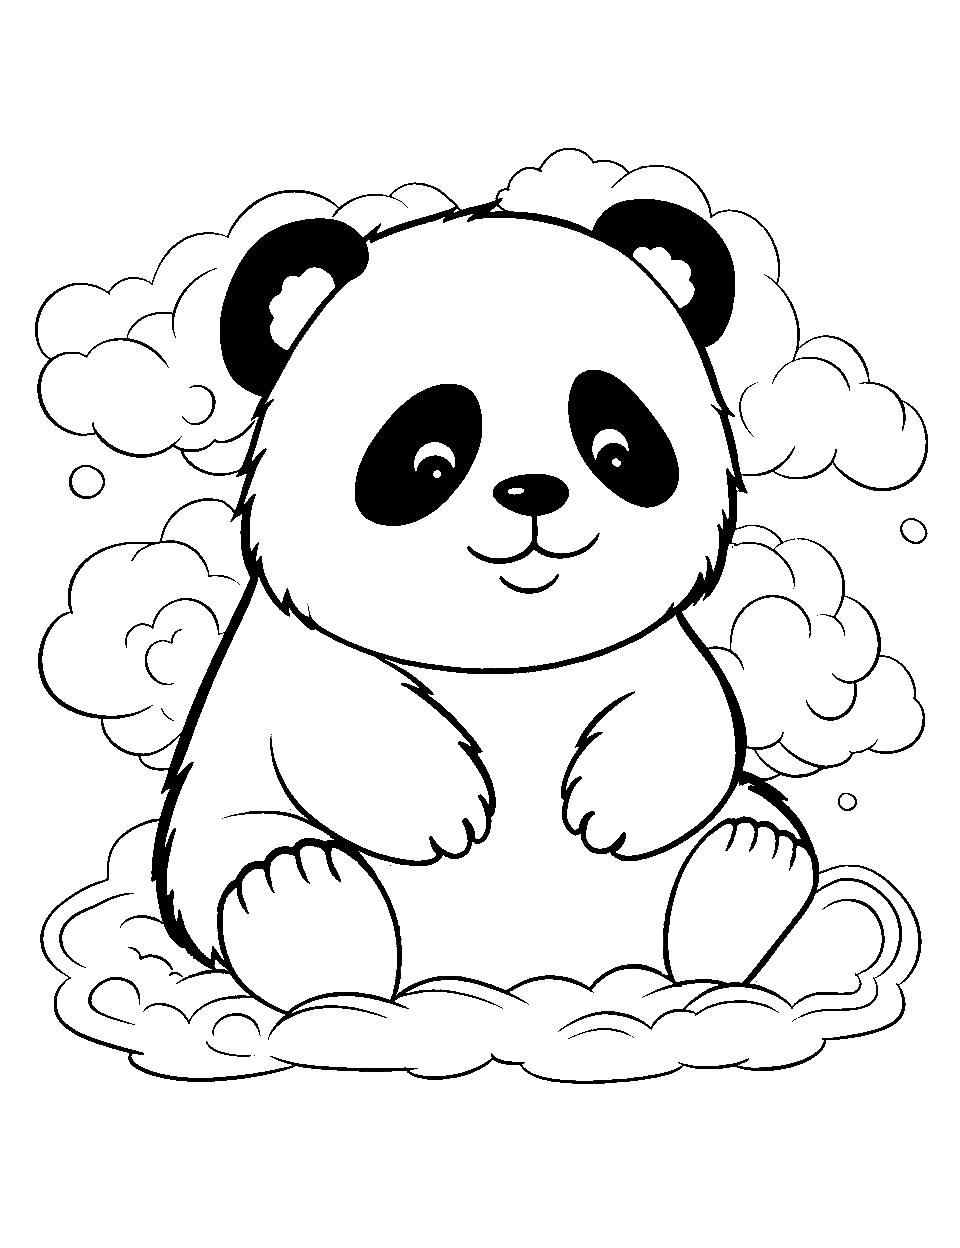 Daydreaming Panda Coloring Page - A panda daydreaming that he is on fluffy clouds chilling.